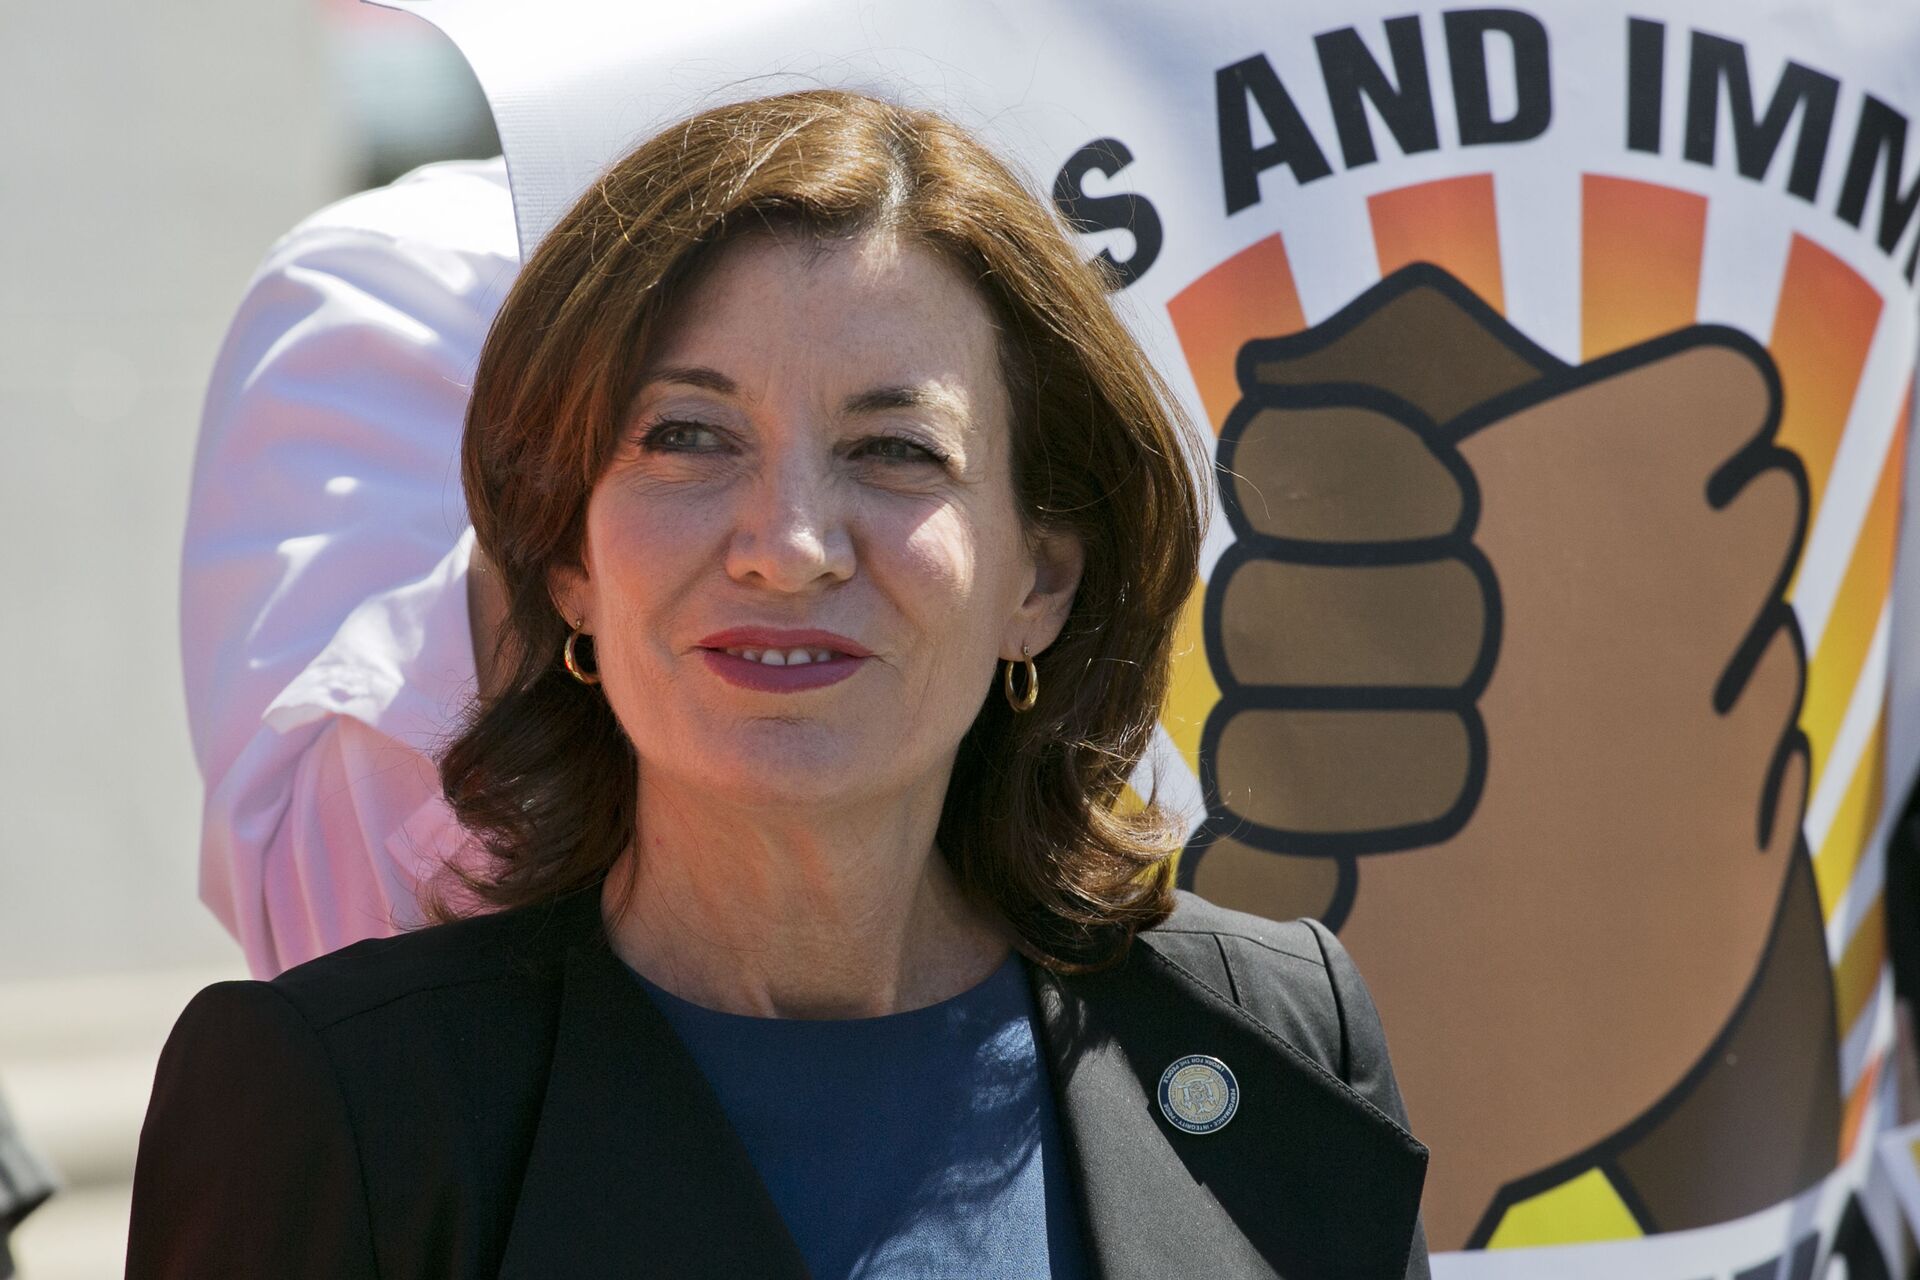 New York's Lt. Gov. Kathy Hochul attends a May Day pro-labor and immigration rights rally, May 1, 2018, in New York - Sputnik International, 1920, 07.09.2021